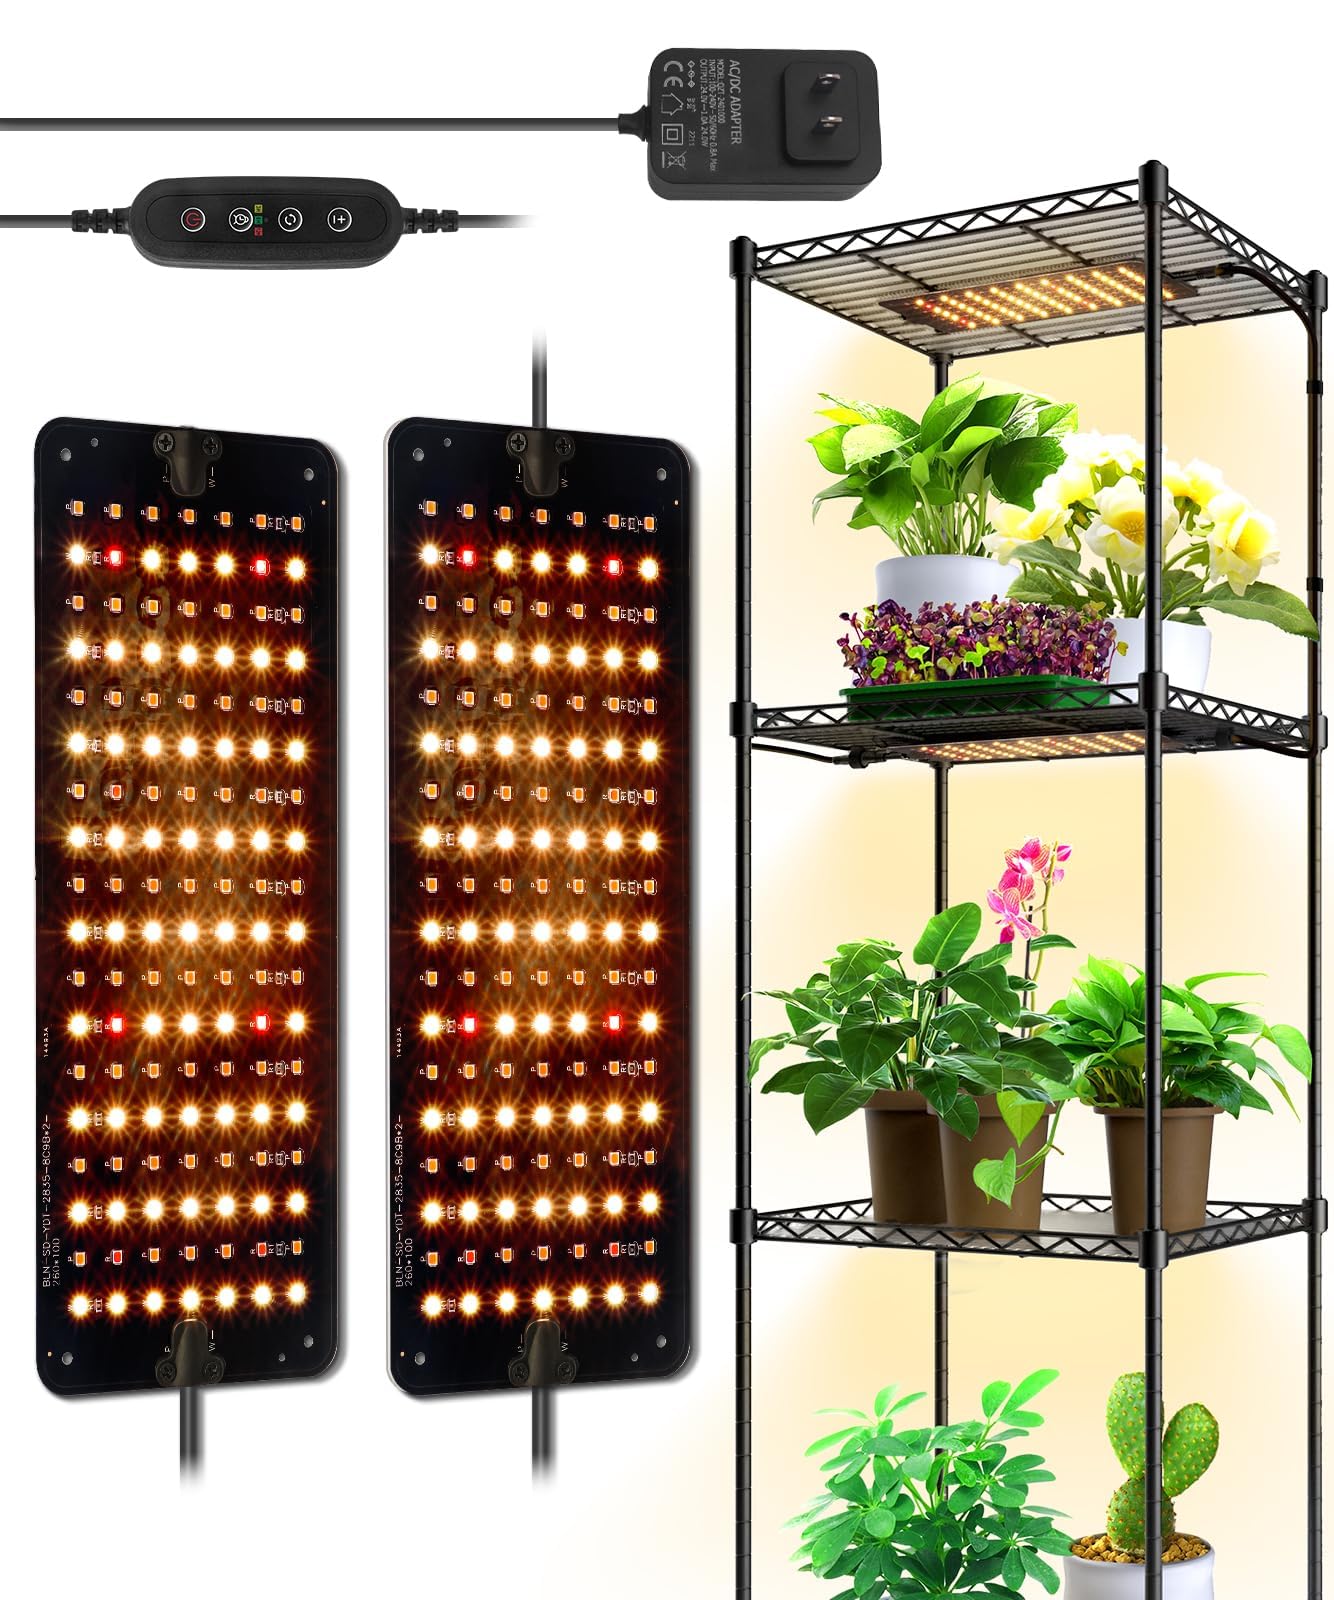 1FT Ultra - Thin LED Grow Light,10W,with 3 Spectrum Modes and Timer,2 Packs,DC10(H) - Barrina led